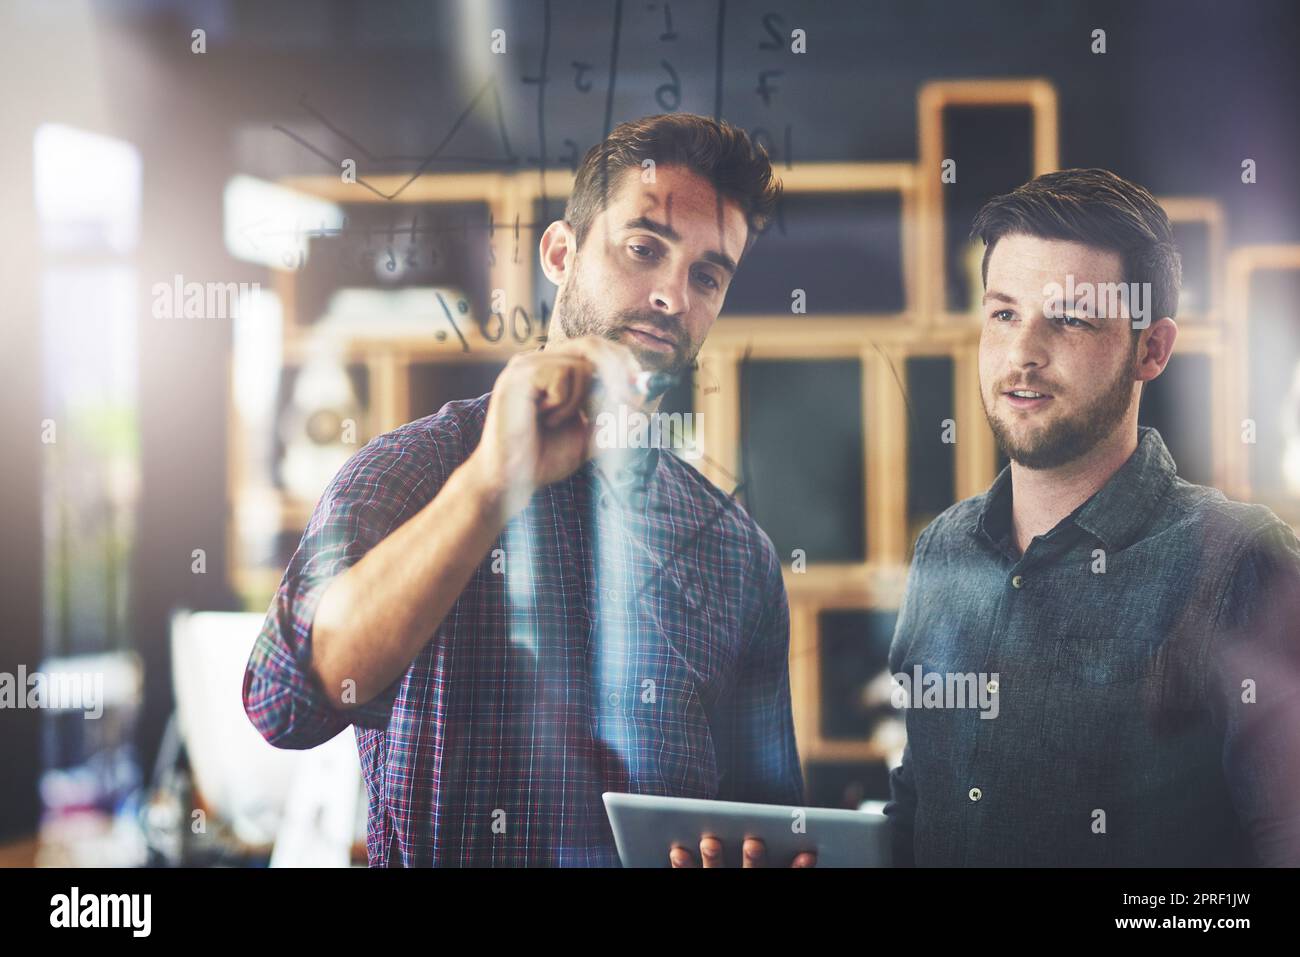 Combining their ideas for maximum effect. two young businessmen using a digital tablet while brainstorming on a glass wall in an office. Stock Photo